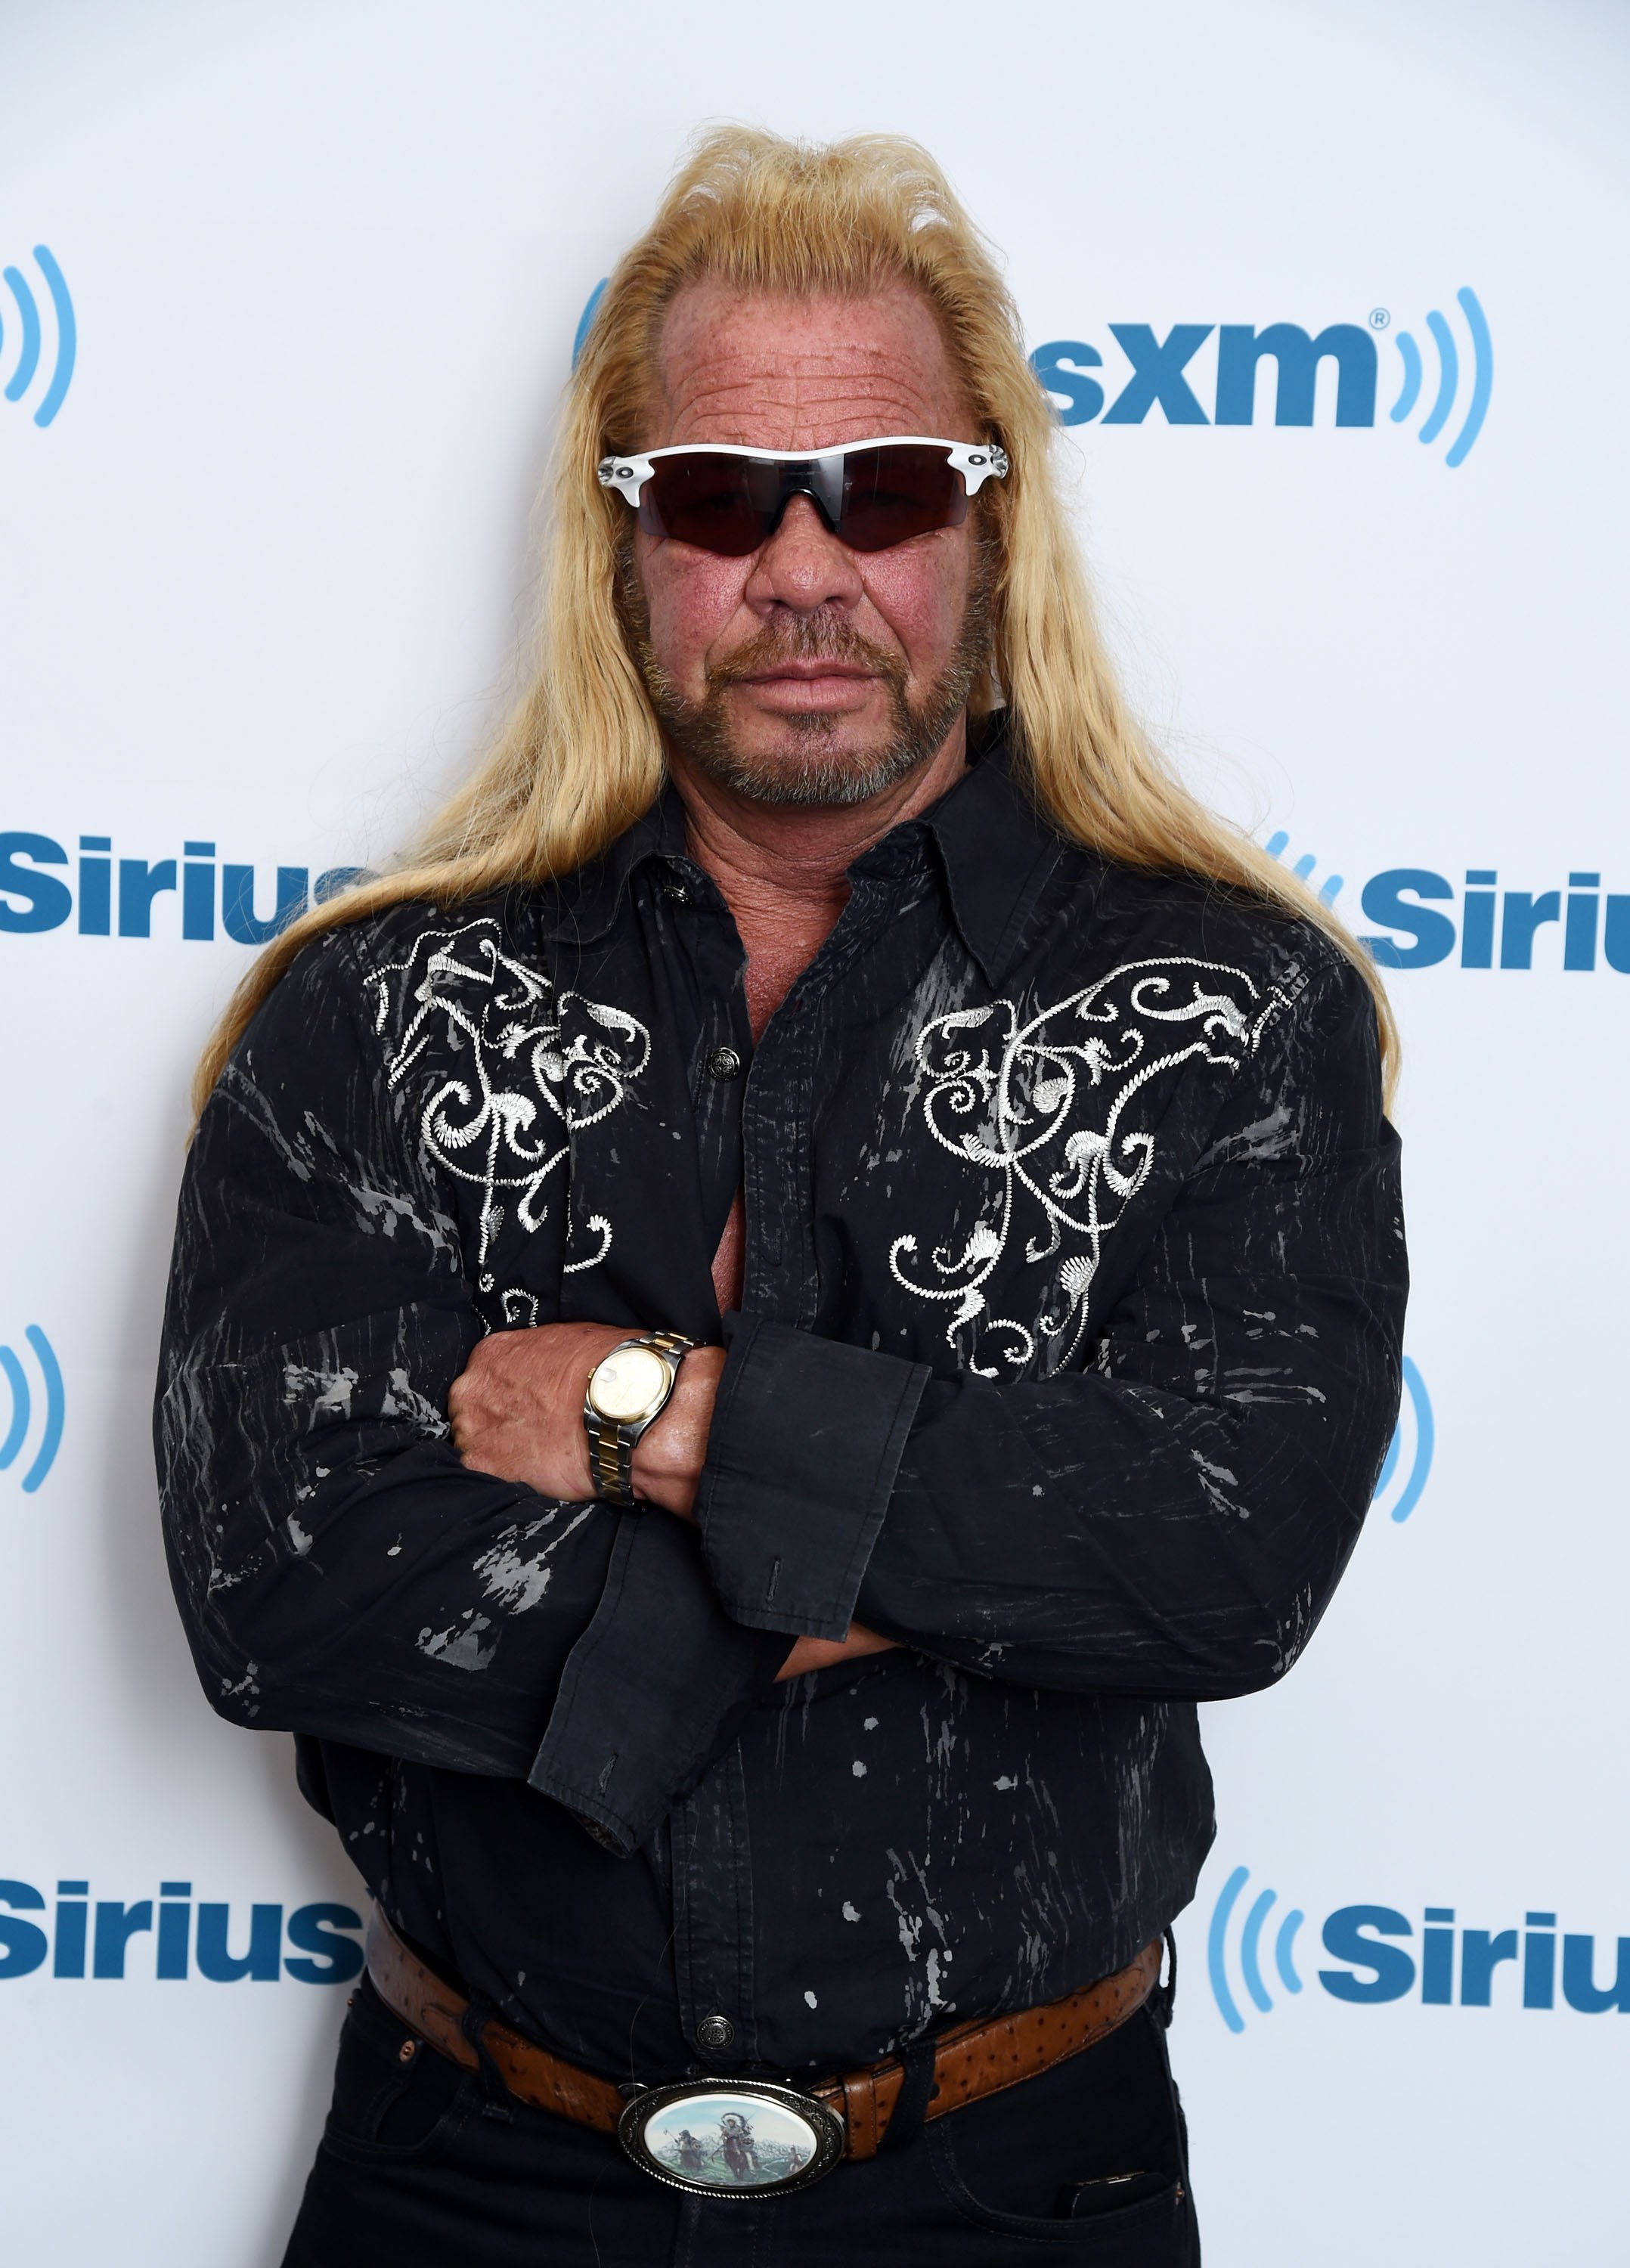 Duane Chapman visits the SiriusXM Studios in New York City on April 24, 2015 | Photo: Getty Images